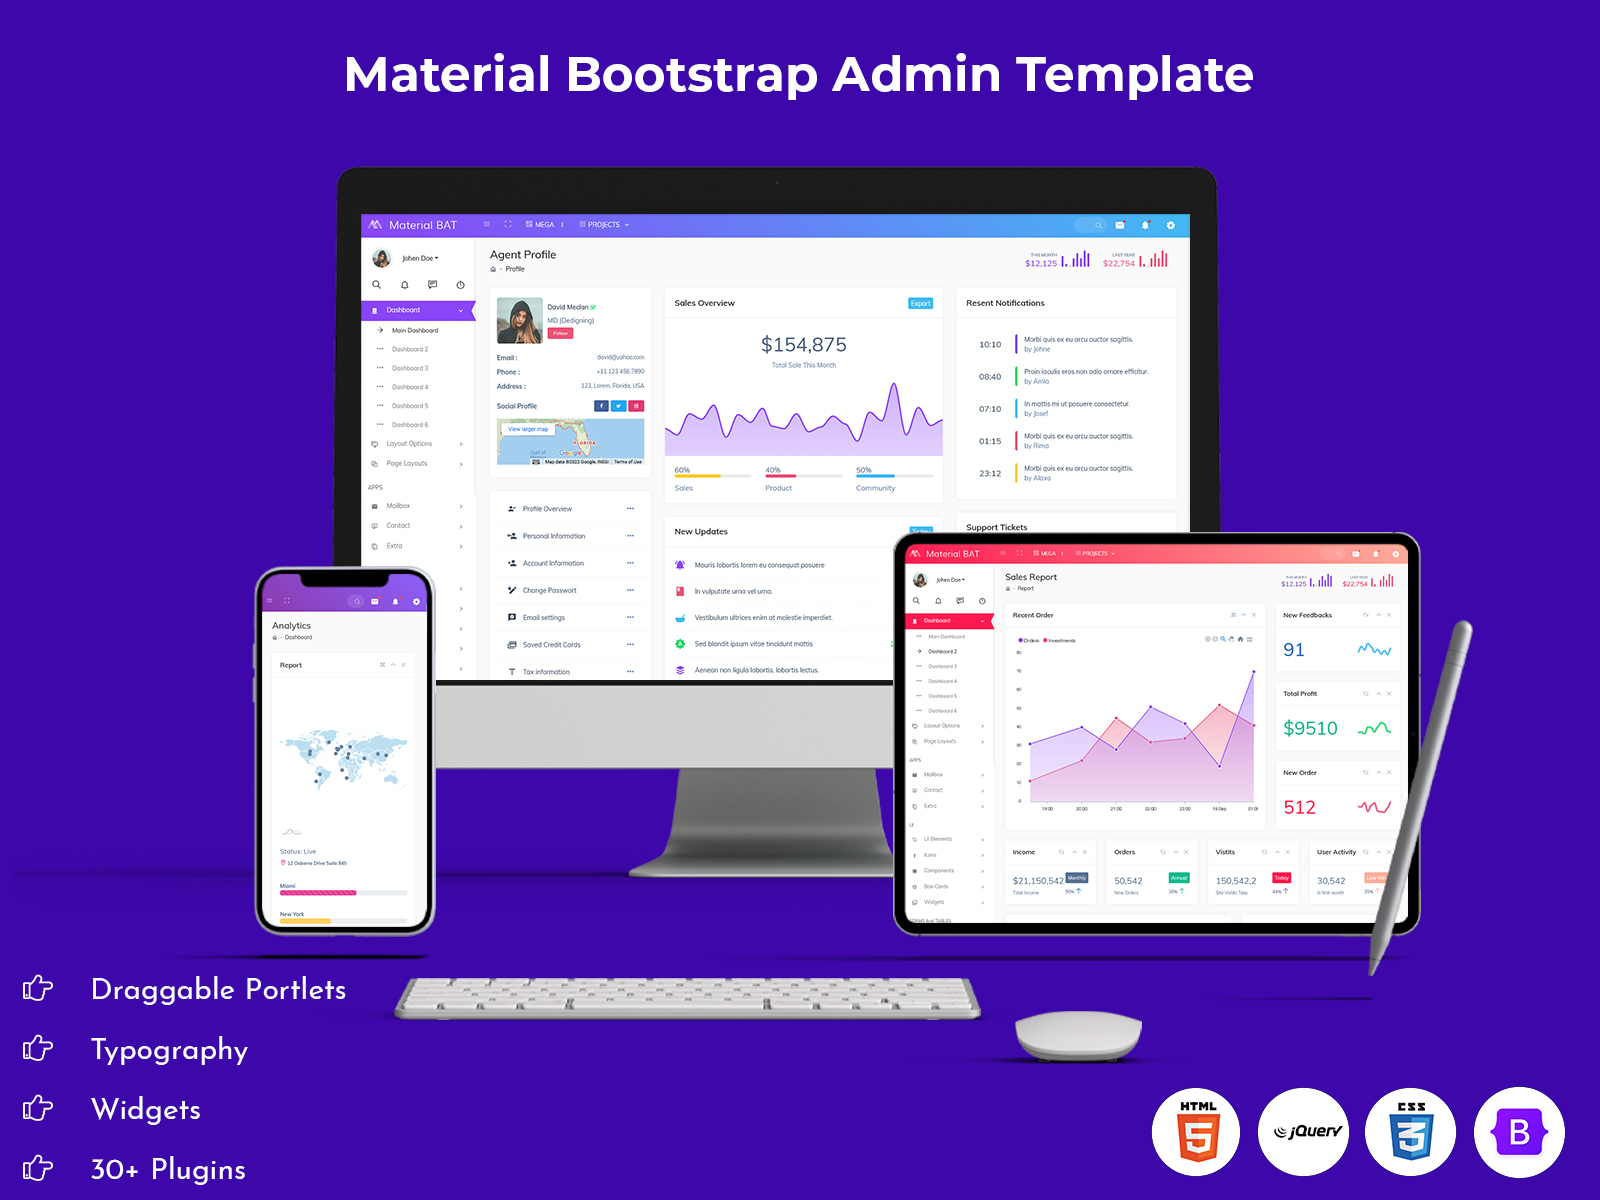 Material Bootstrap Admin Template